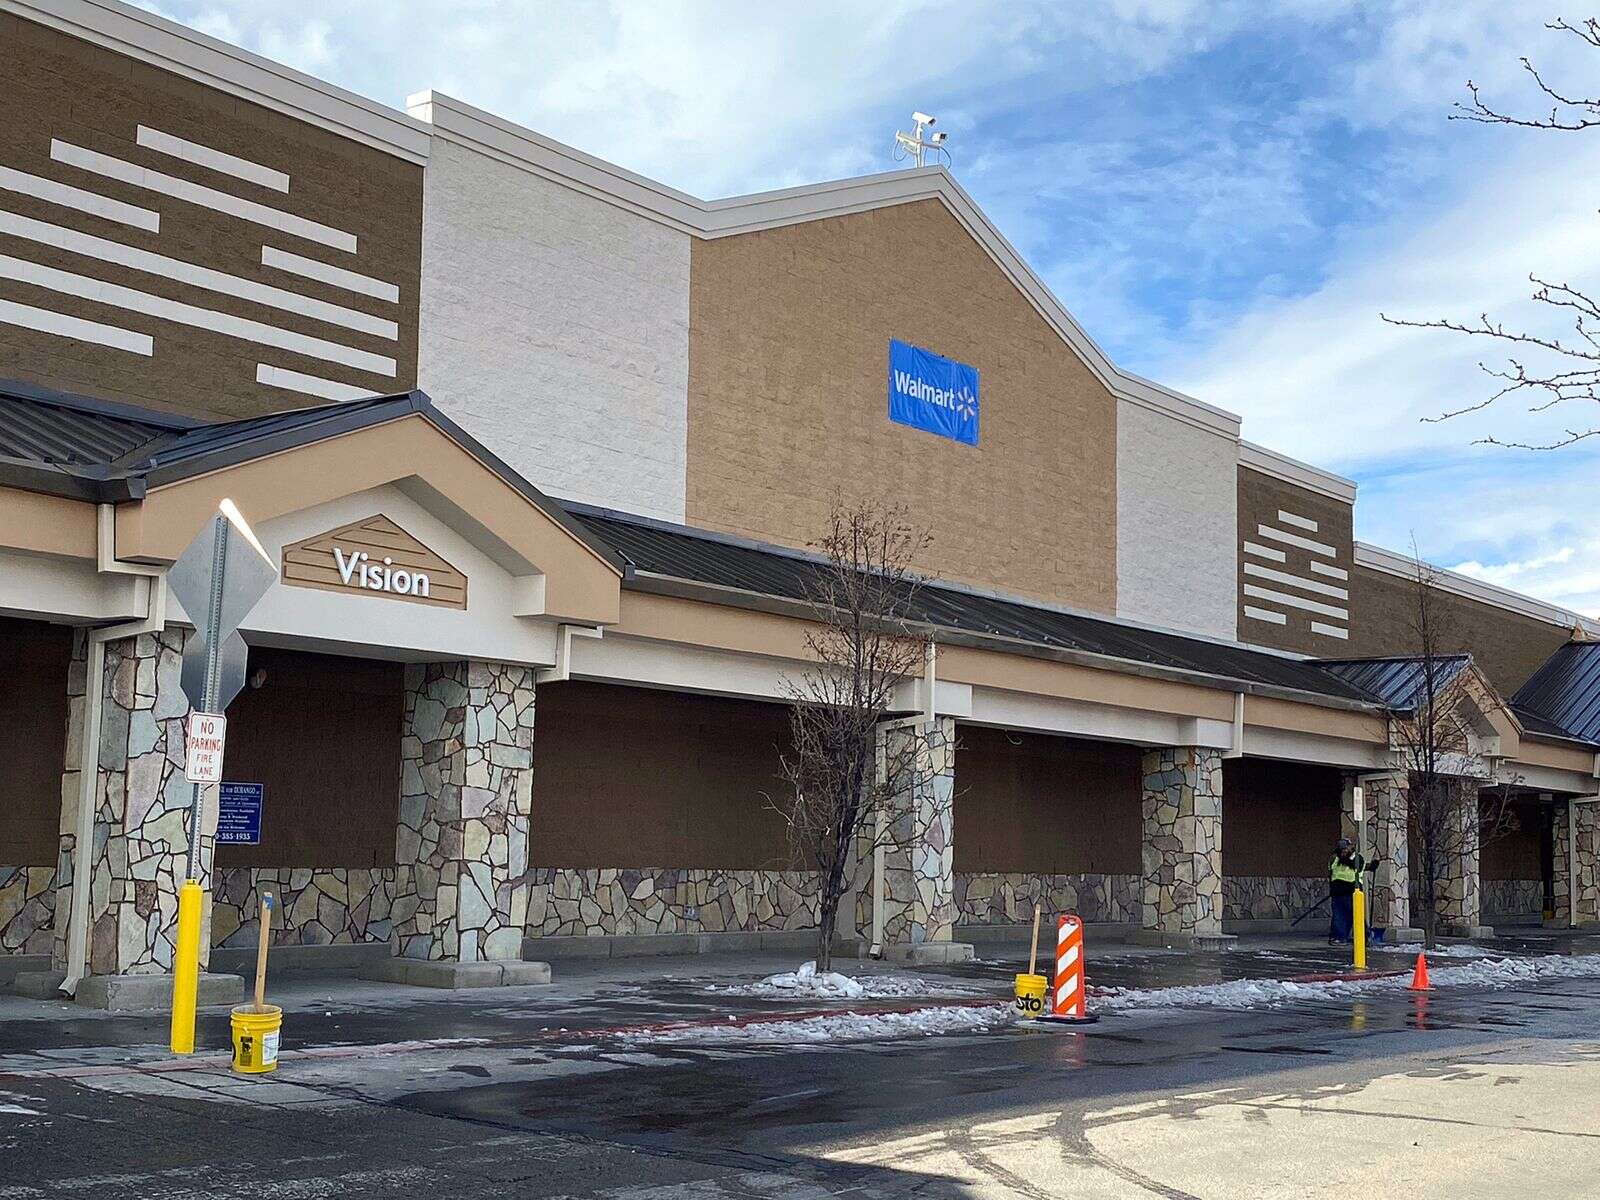 Walmart painting hubbub simply a surface issue – The Durango Herald